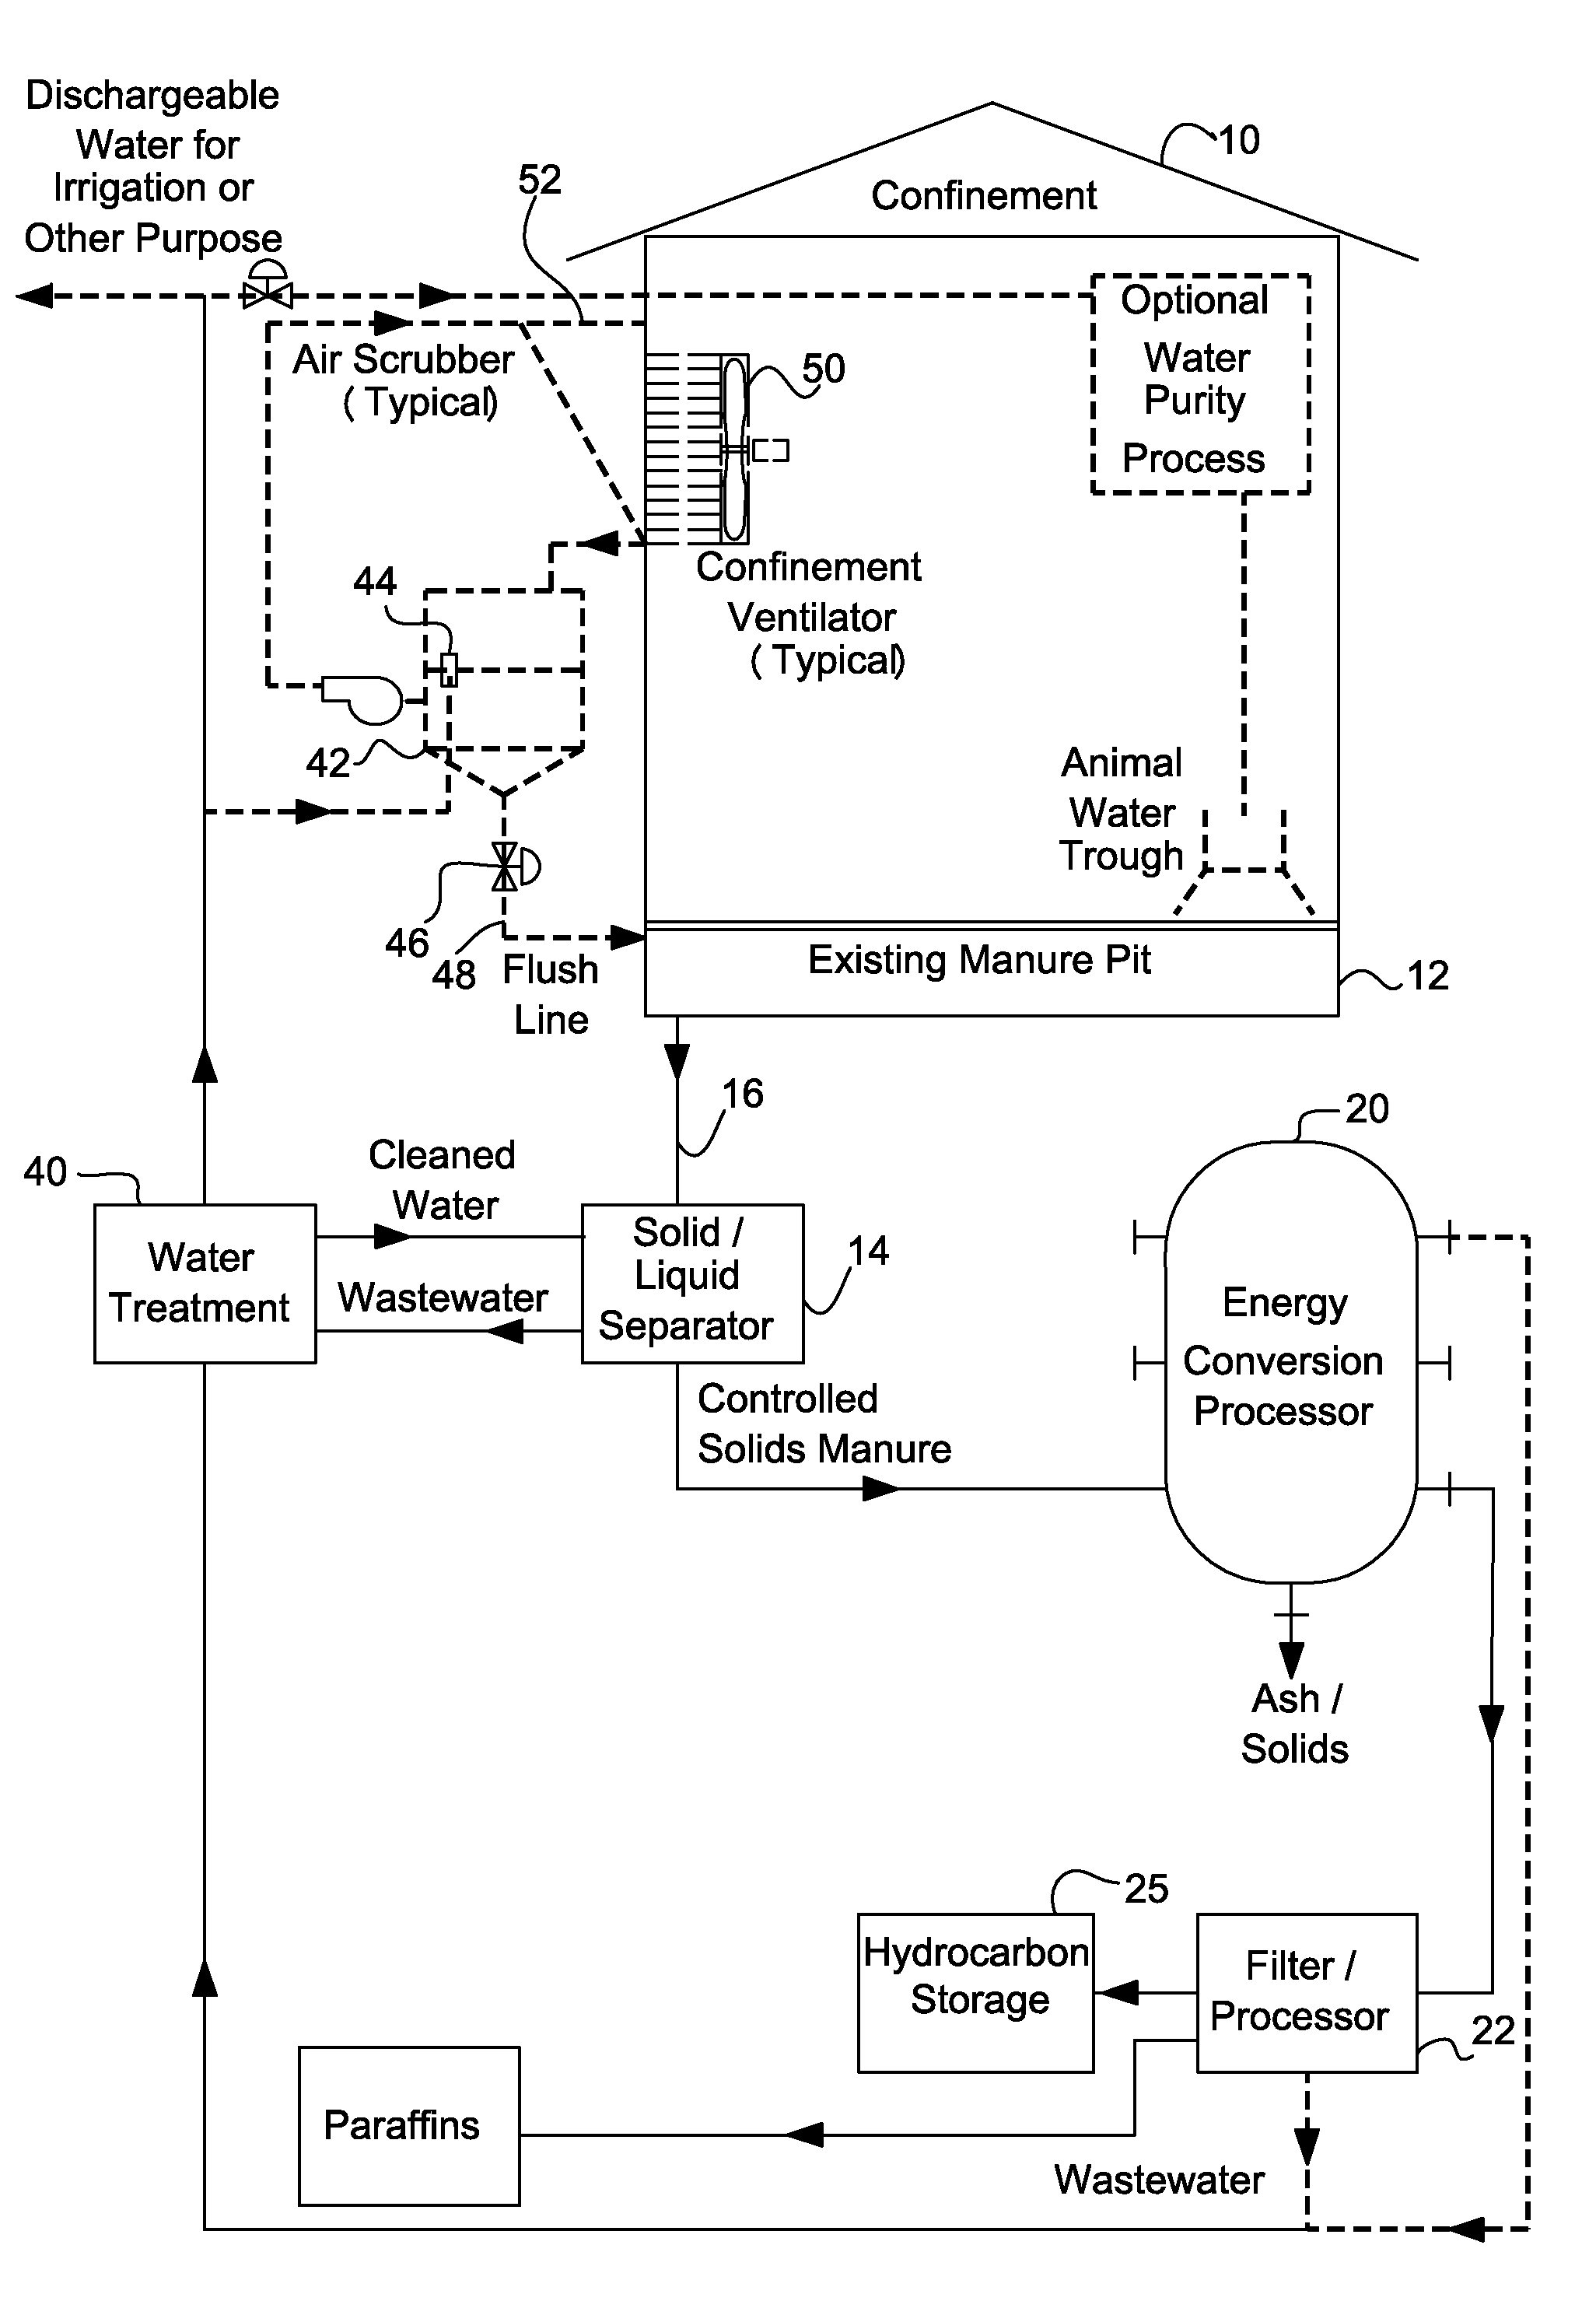 Methods and systems for converting waste into complex hydrocarbons